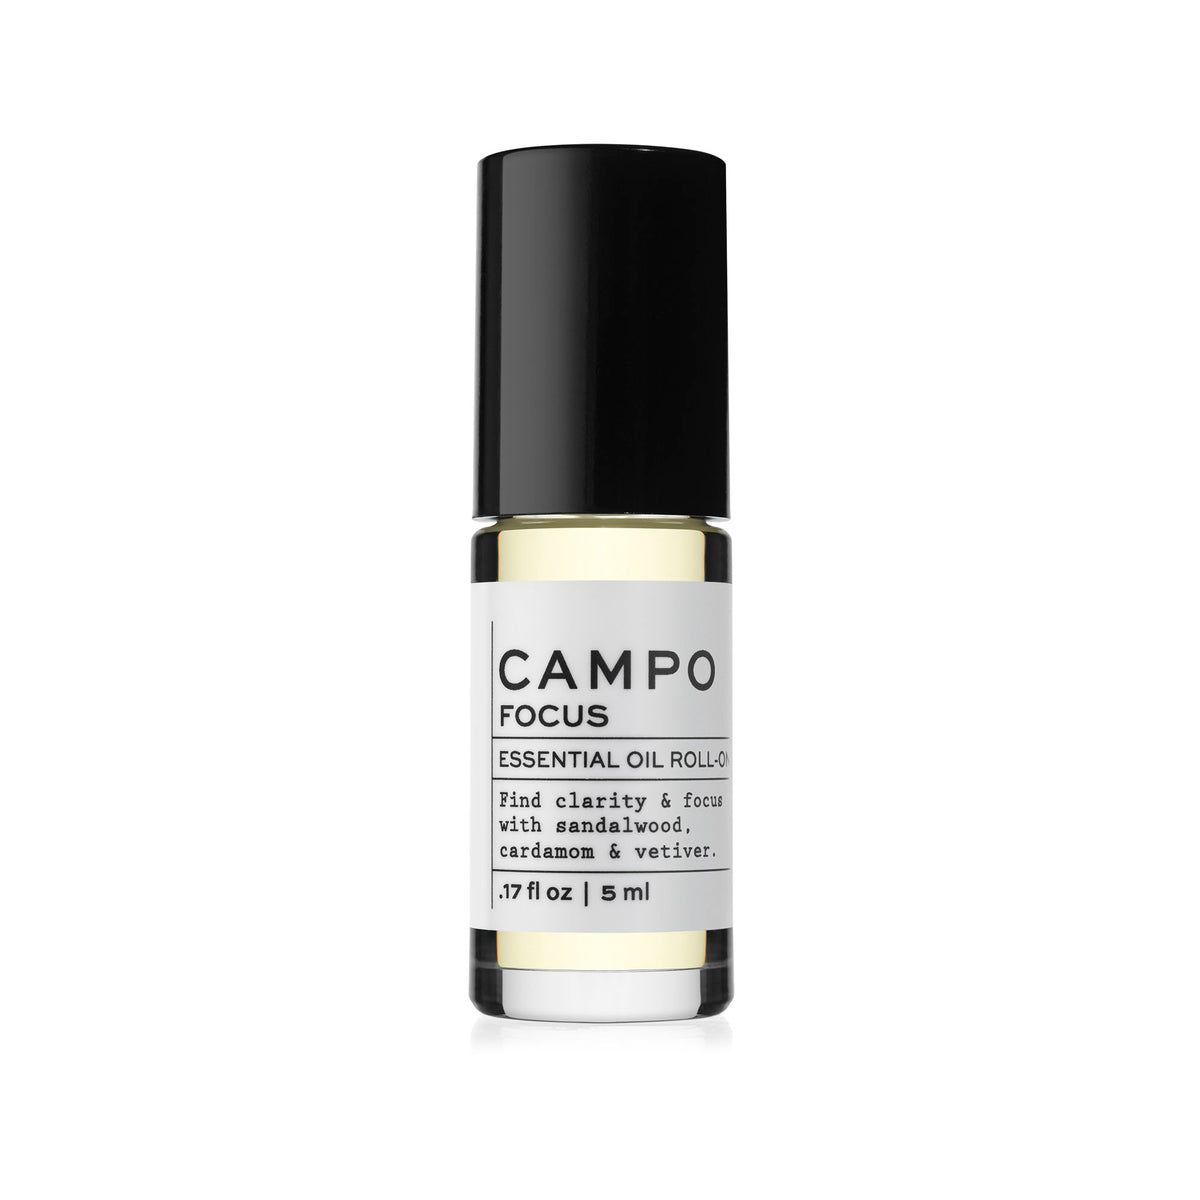 Campo Beauty Essential Oil FOCUS Blend Roll-On that in 5 ml. Inspires feelings of peace and tranquility to promote heightened awareness and mental clarity. Feel clarity and grounded with this 100% natural essential oil roll-on blend of Australian Sandalwood, Cardamom, Vetiver &amp; Cedarwood Atlas, Himalayan, Texas &amp; Virginia.